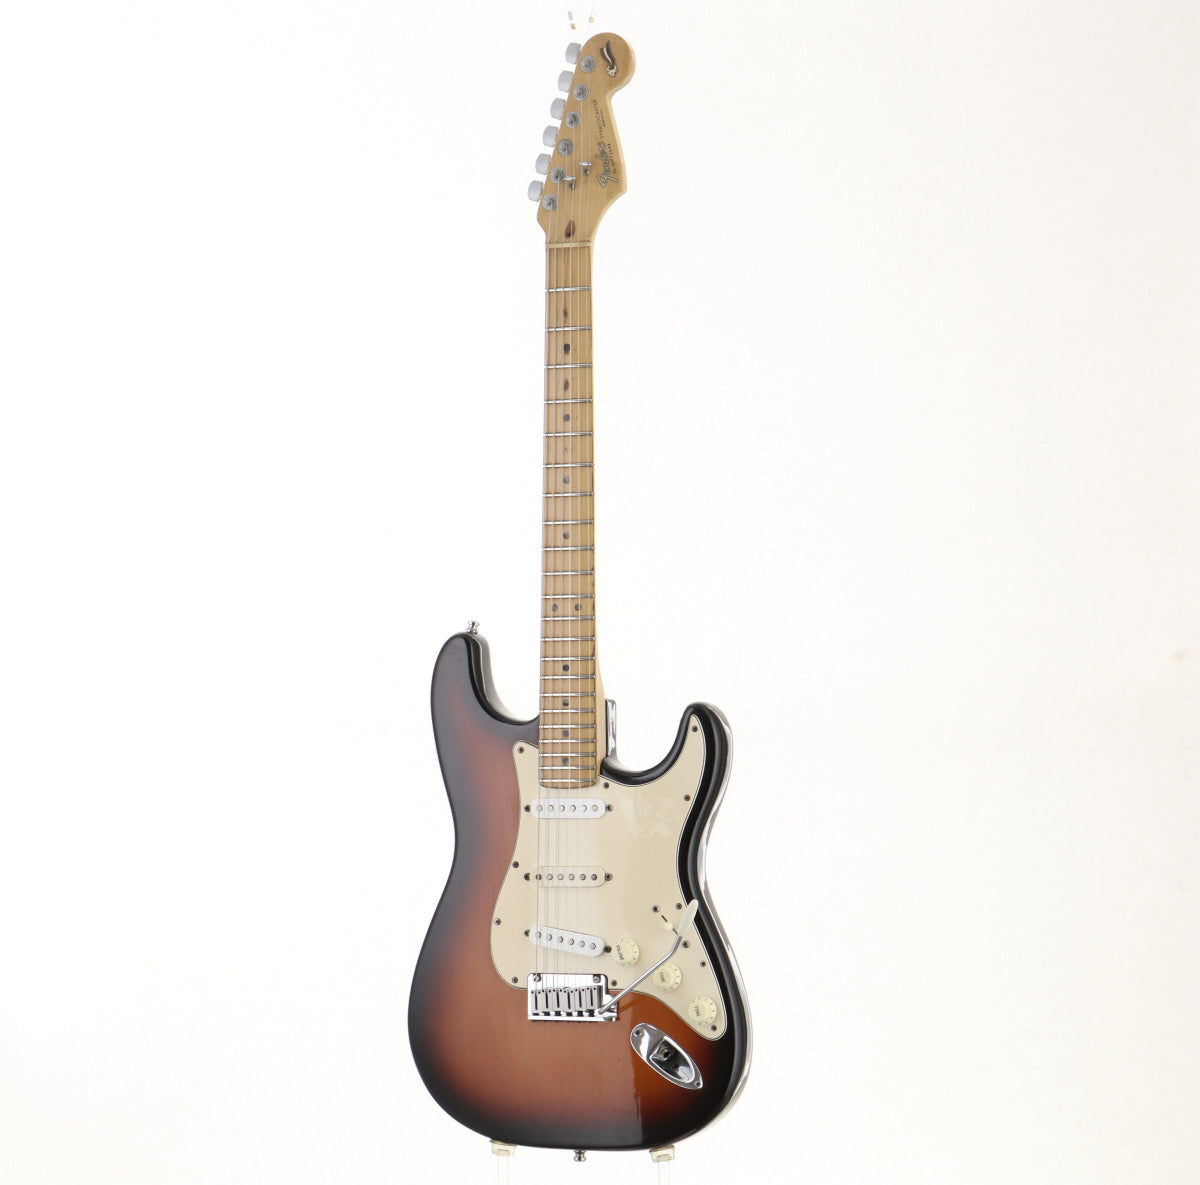 [SN N4172644] USED Fender / 40th Anniversary American Standard Stratocaster Modified 3-Color Sunburst [09]